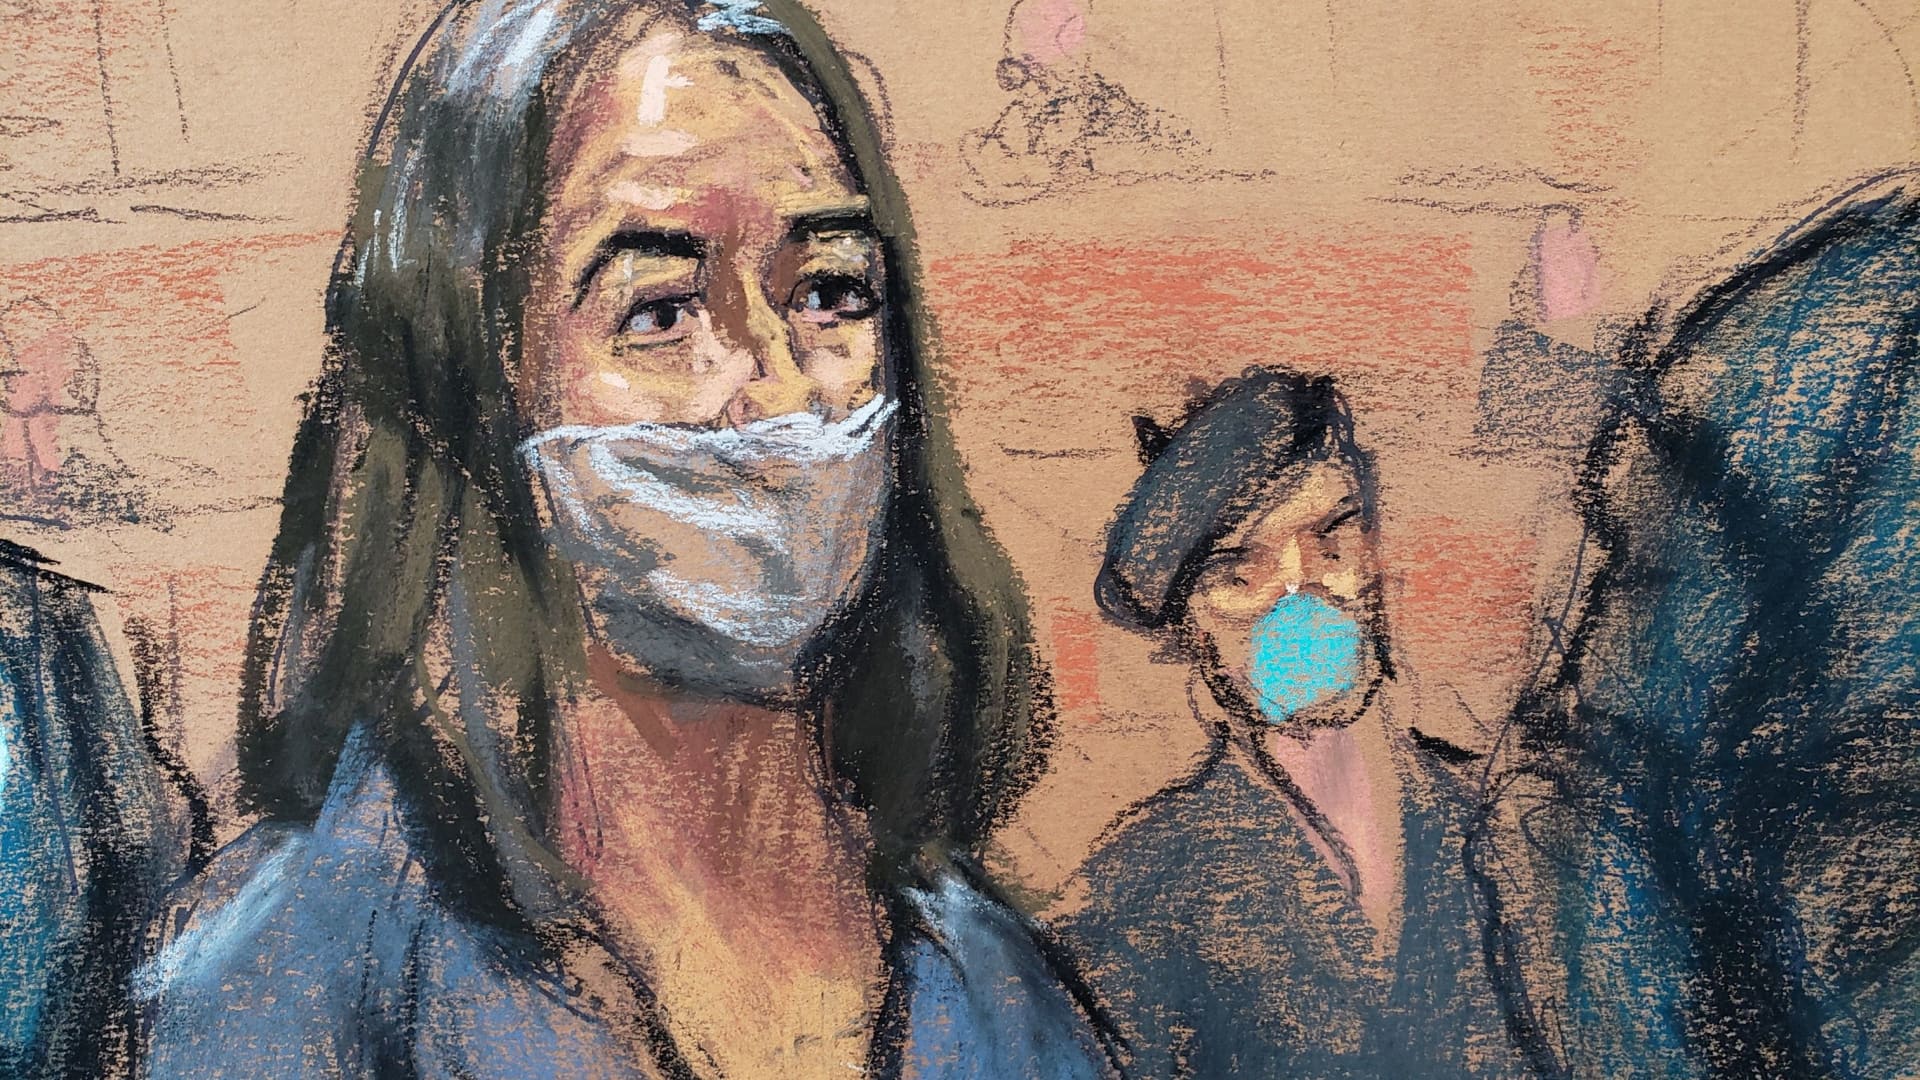 British socialite Ghislaine Maxwell appears during her arraignment hearing on a new indictment at Manhattan Federal Court in New York, April 23, 2021, in this courtroom sketch.